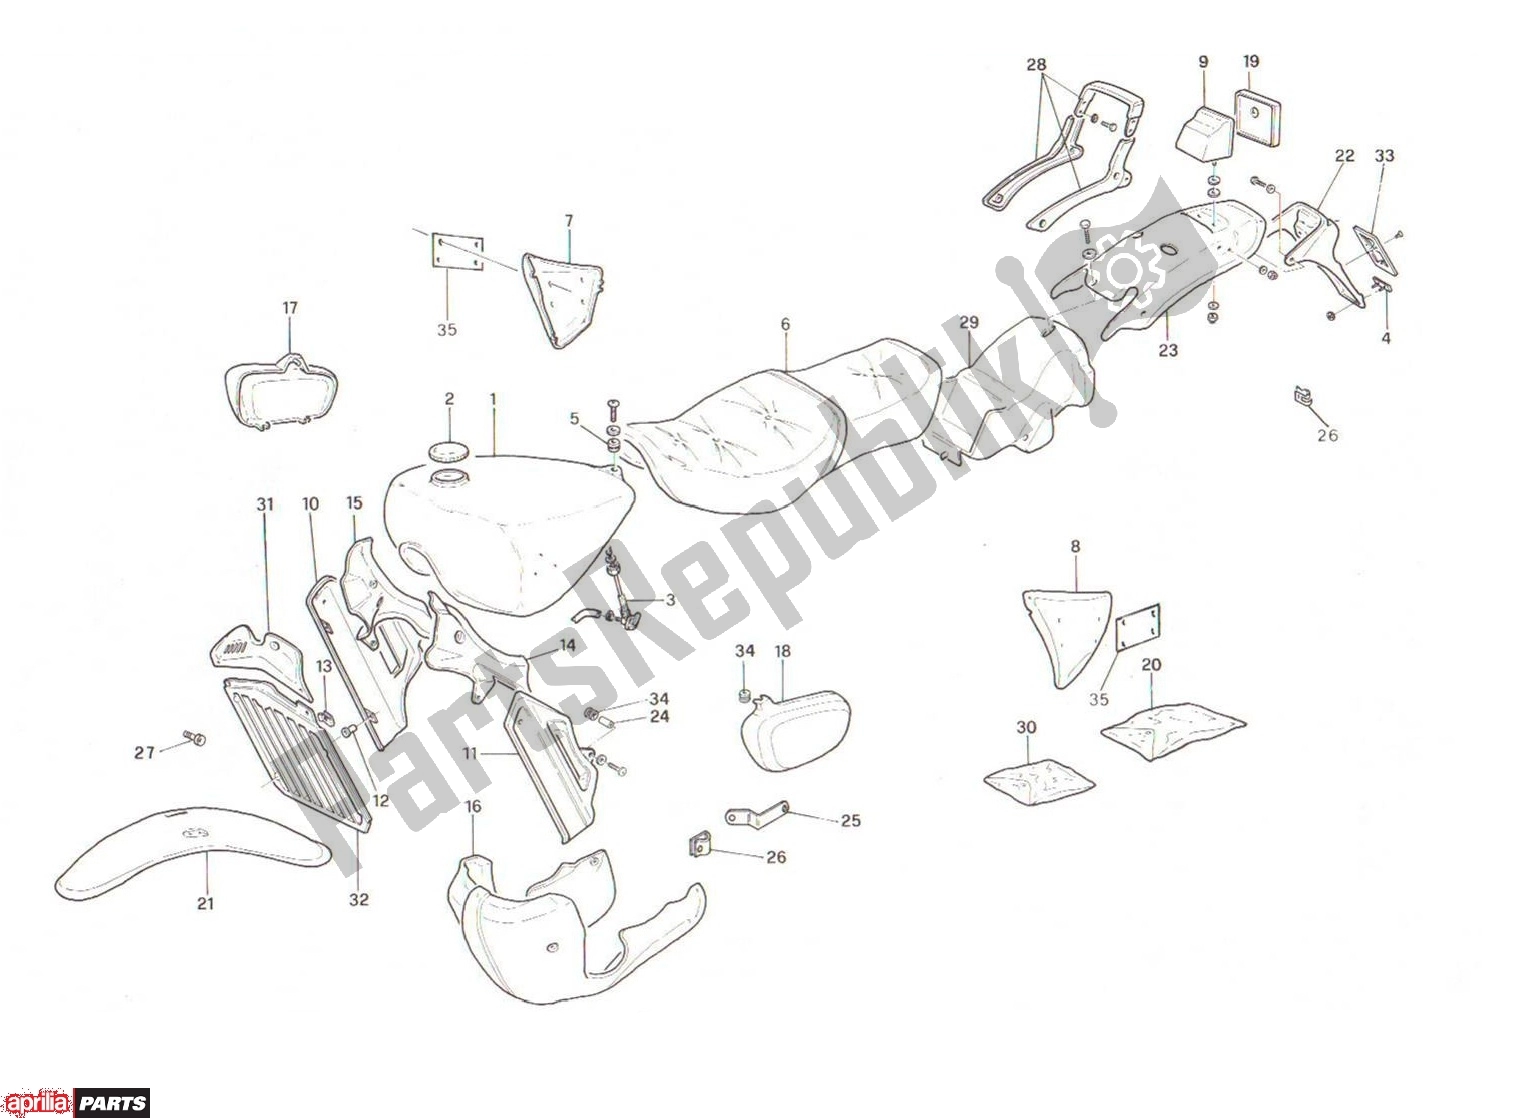 All parts for the Body of the Aprilia Red Rose 606 125 1987 - 1990